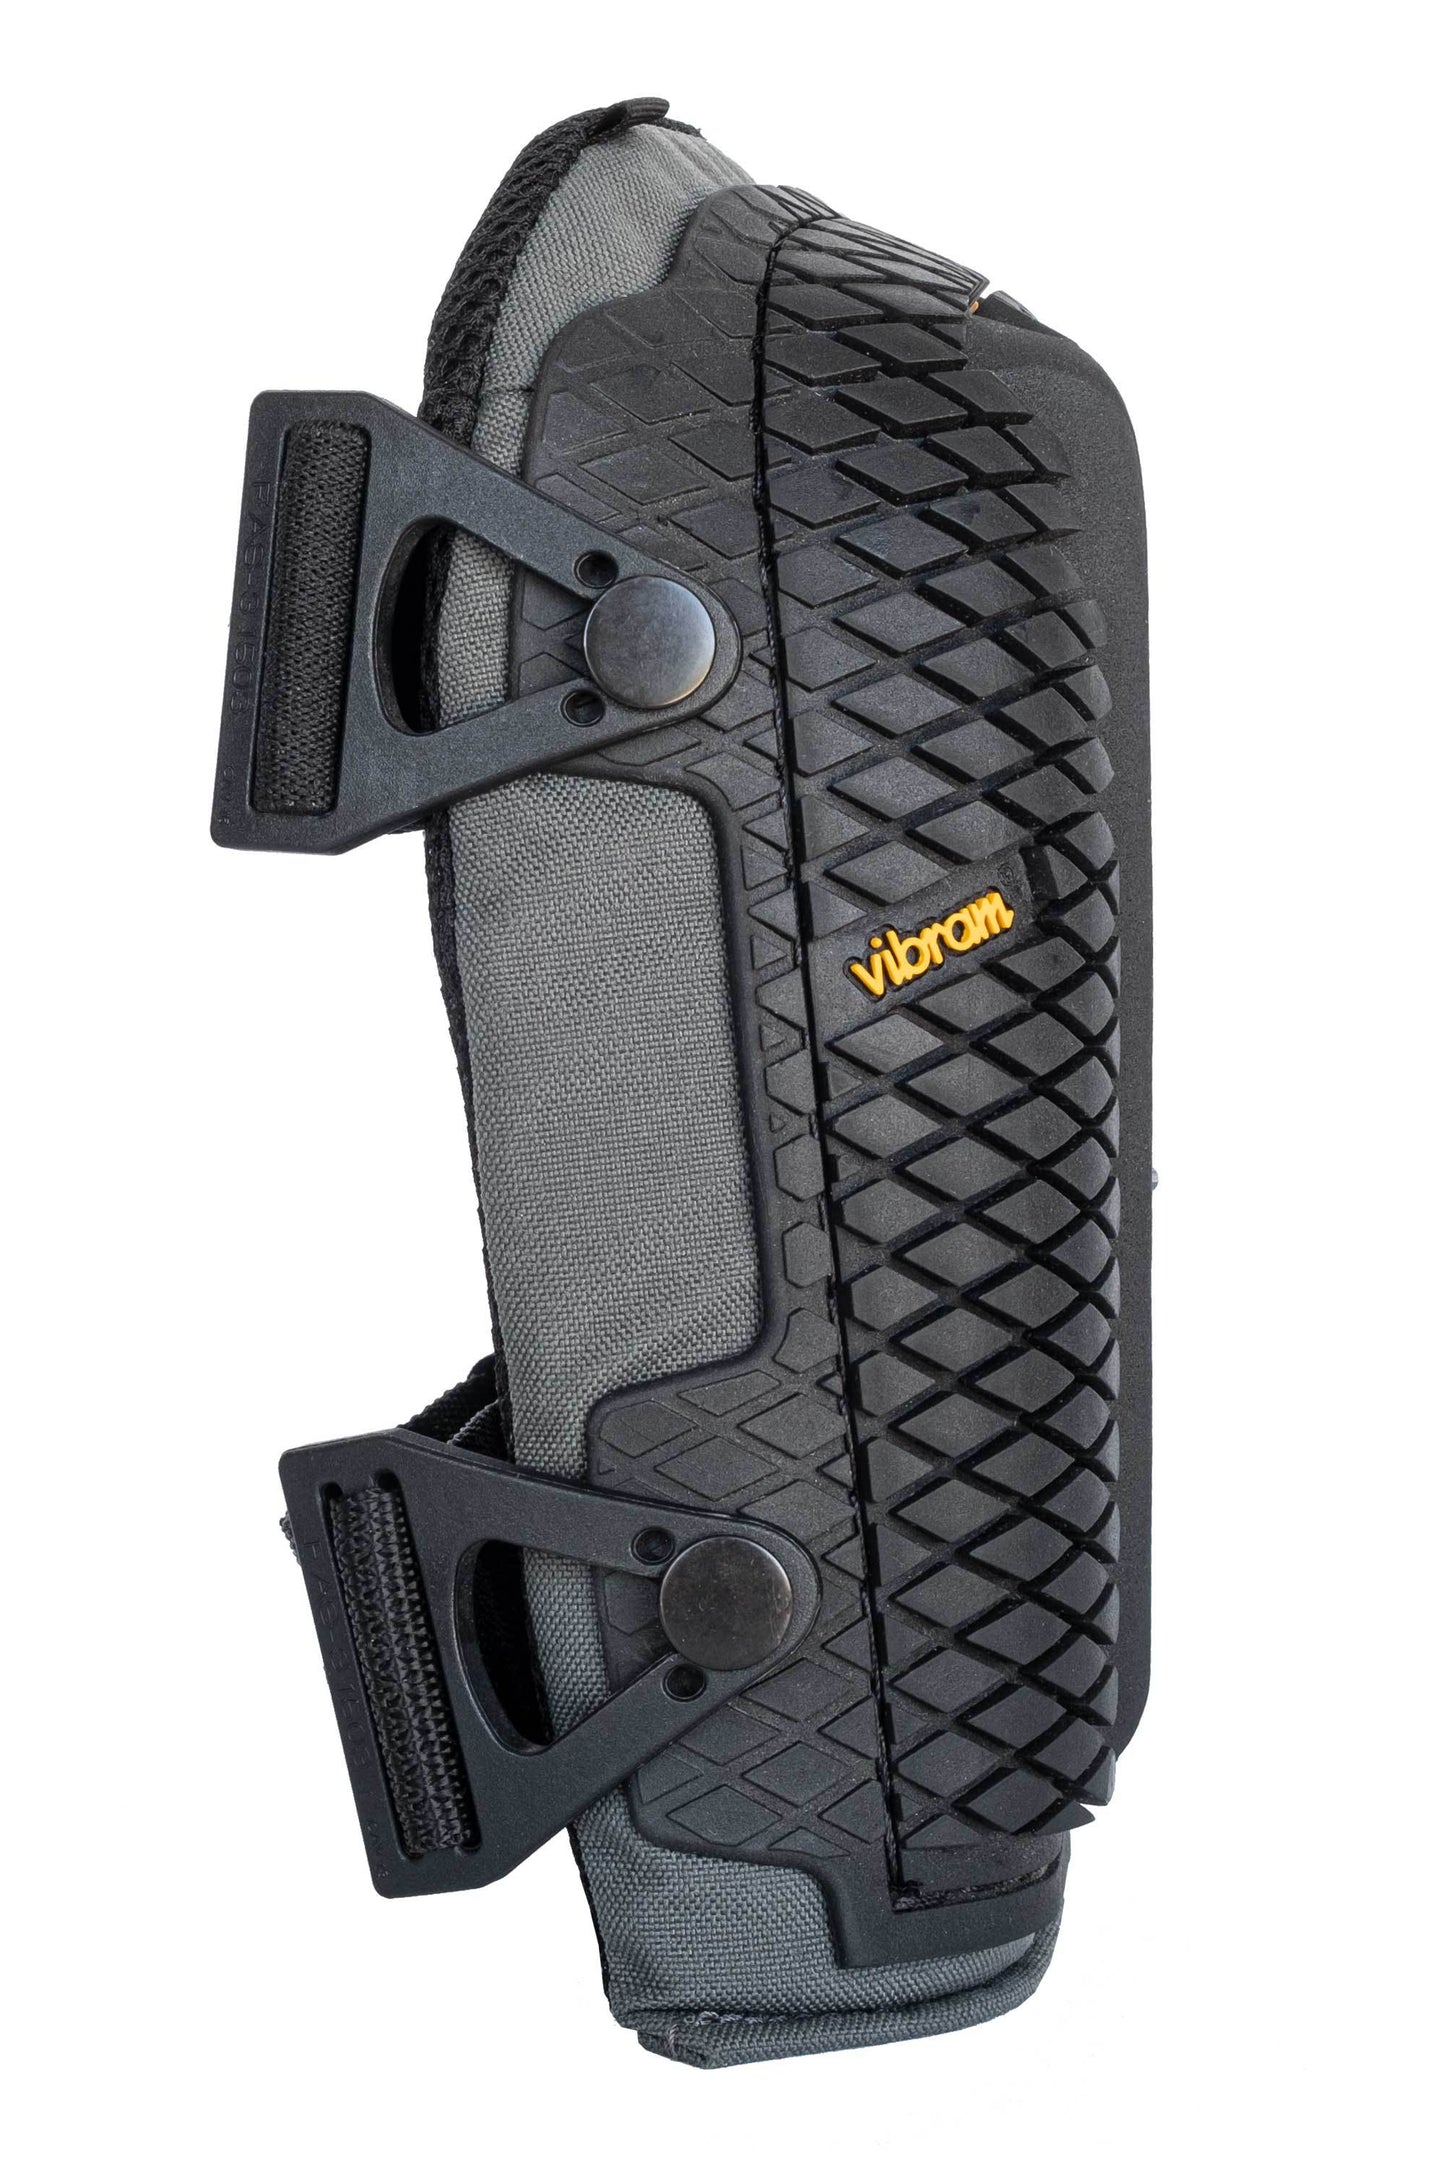 STABILIZER KNEE PAD with VIBRAM® RUBBER CAP KEEPS YOU LEVEL ON THE ROOF AND ANY UNEVEN WORK SURFACE